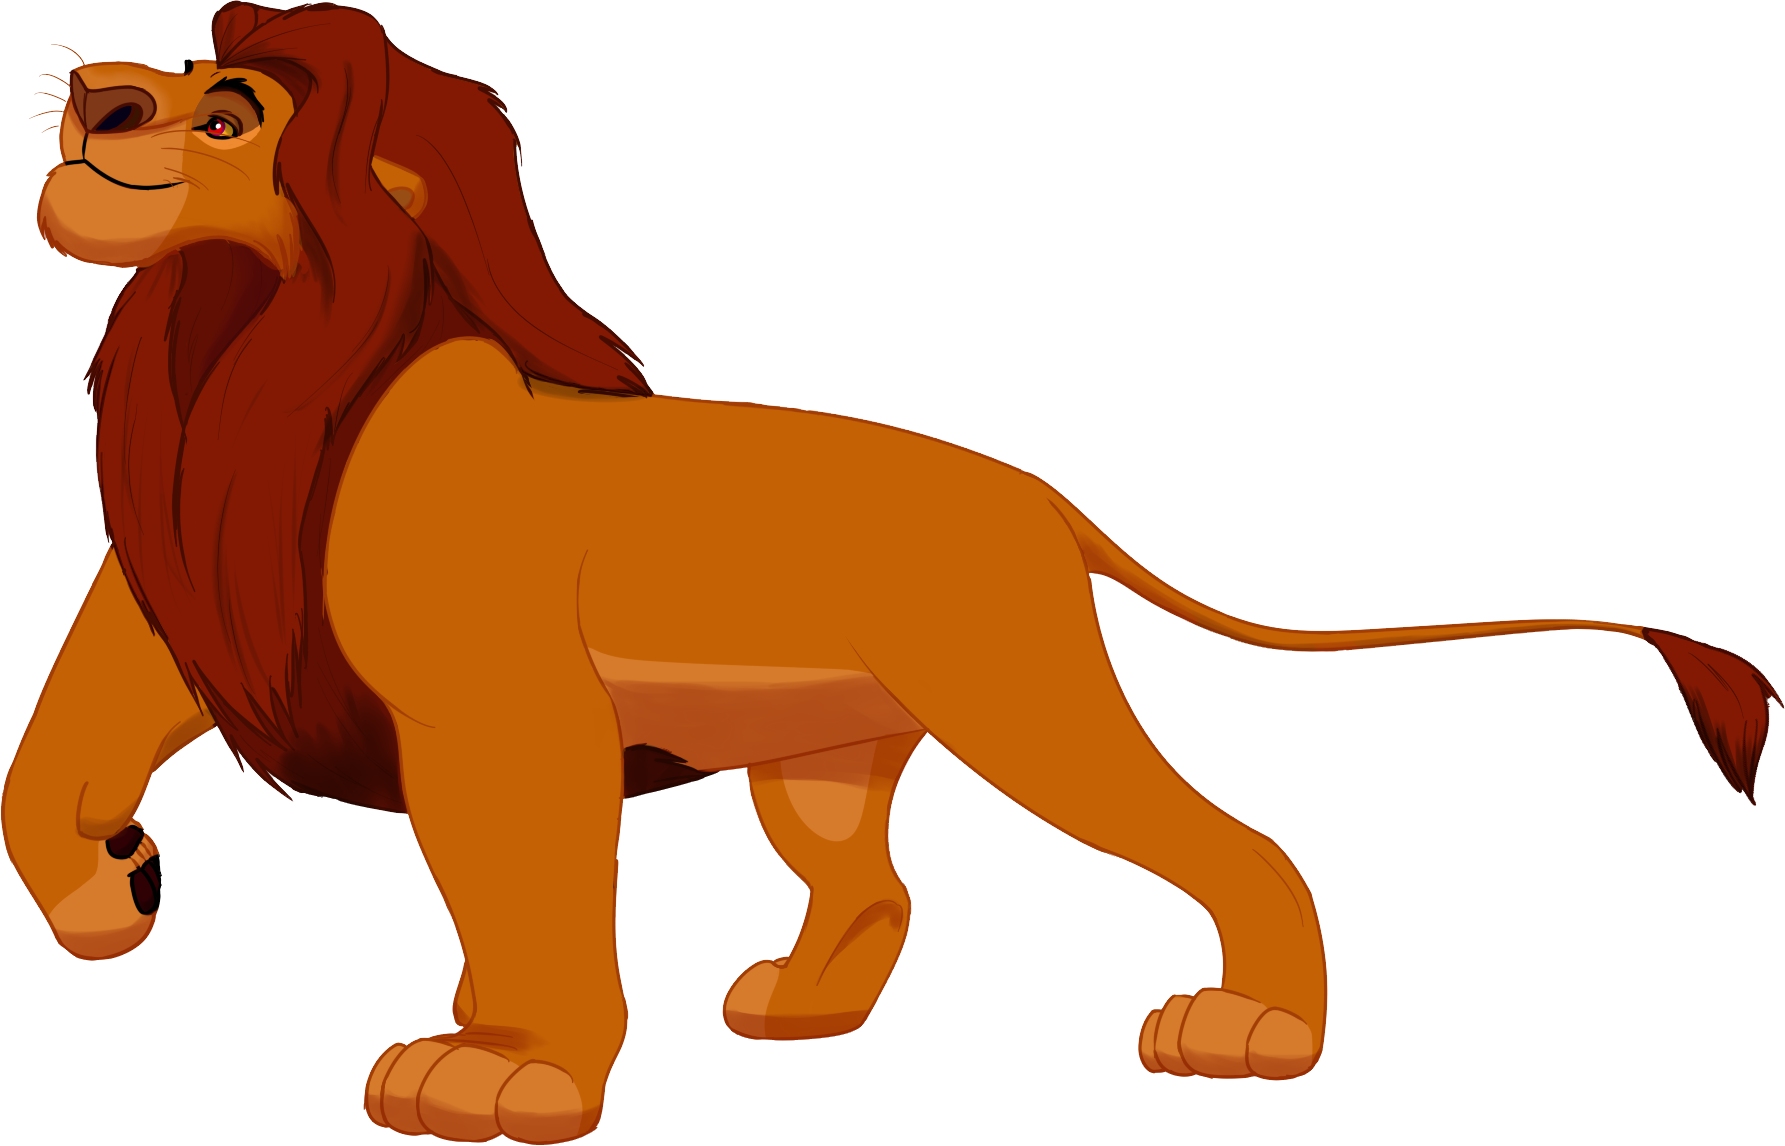 The Lion King Transparent Png Images Lion King Cartoon Characters Free Transparent Png Logos